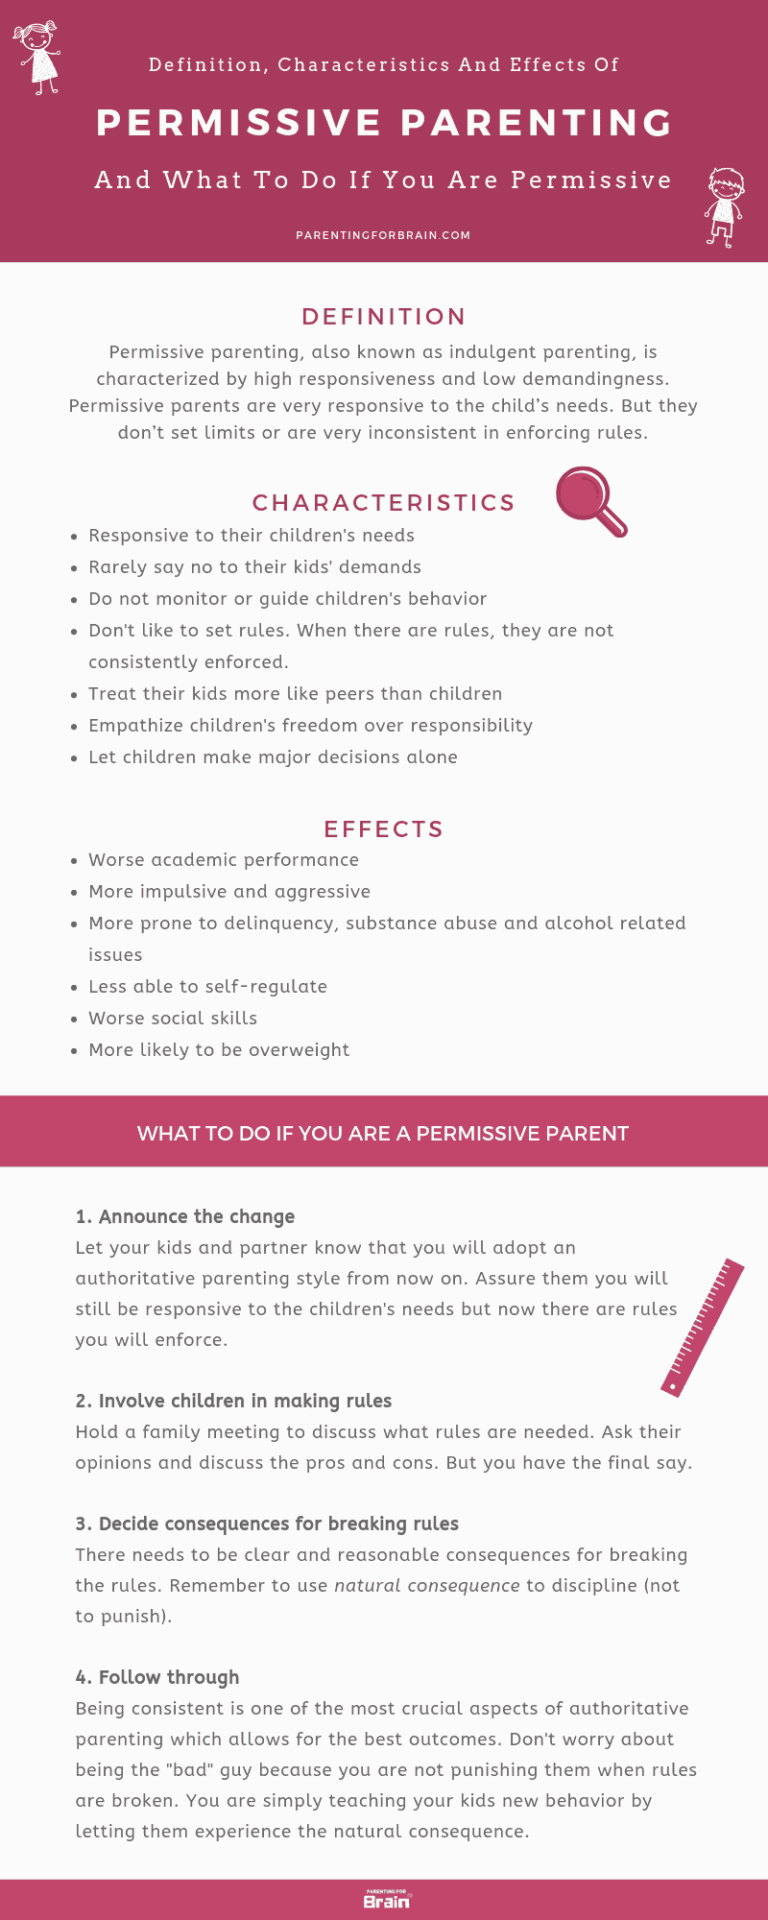 Understanding Permissive Parenting: What You Need to Know